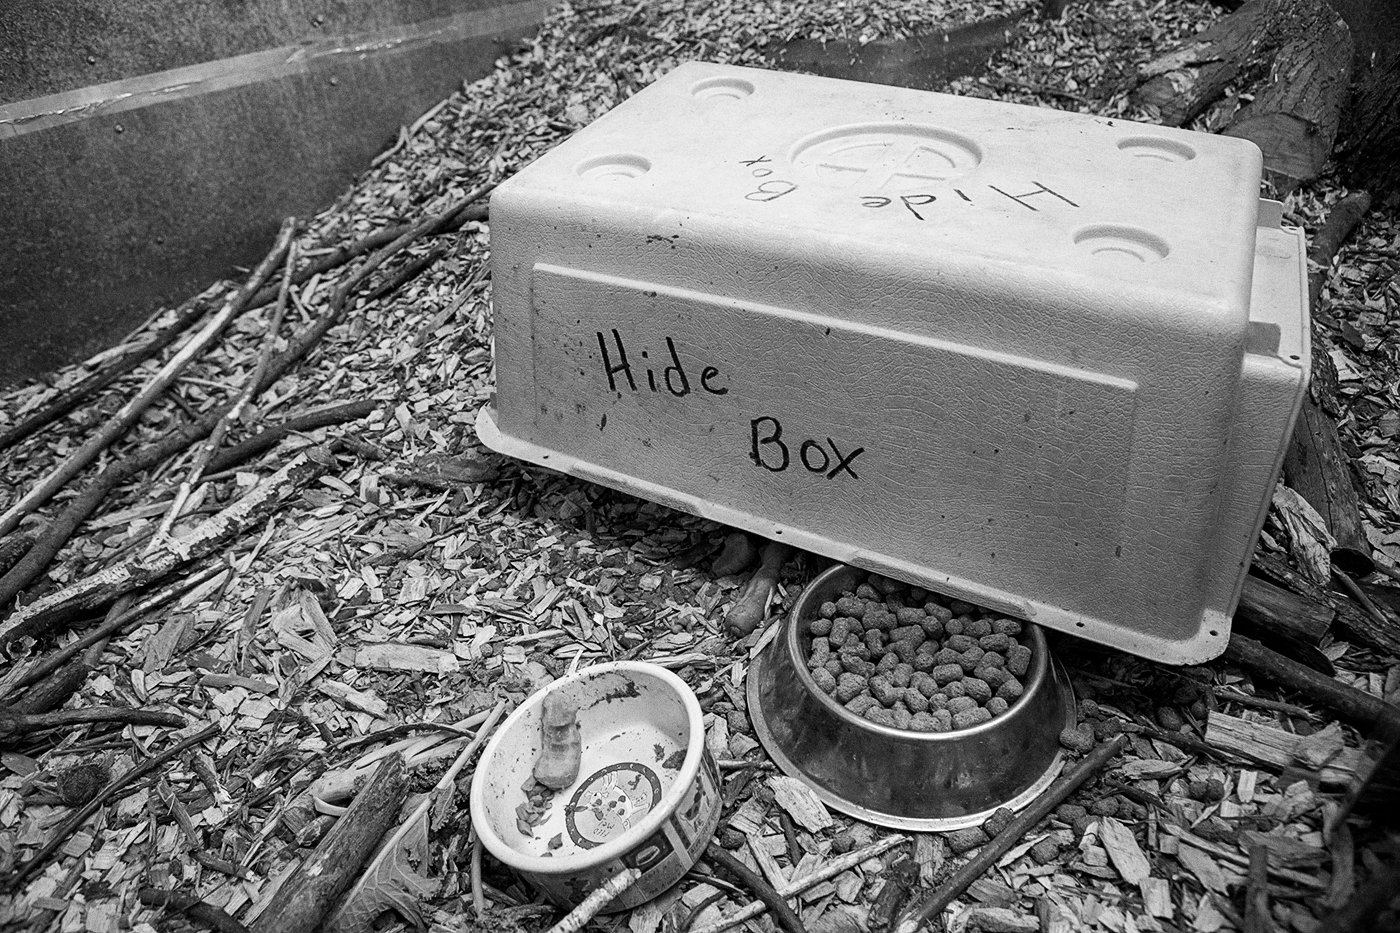 An overturned box labelled "Hide Box" at the Toronto Wildlife Centre